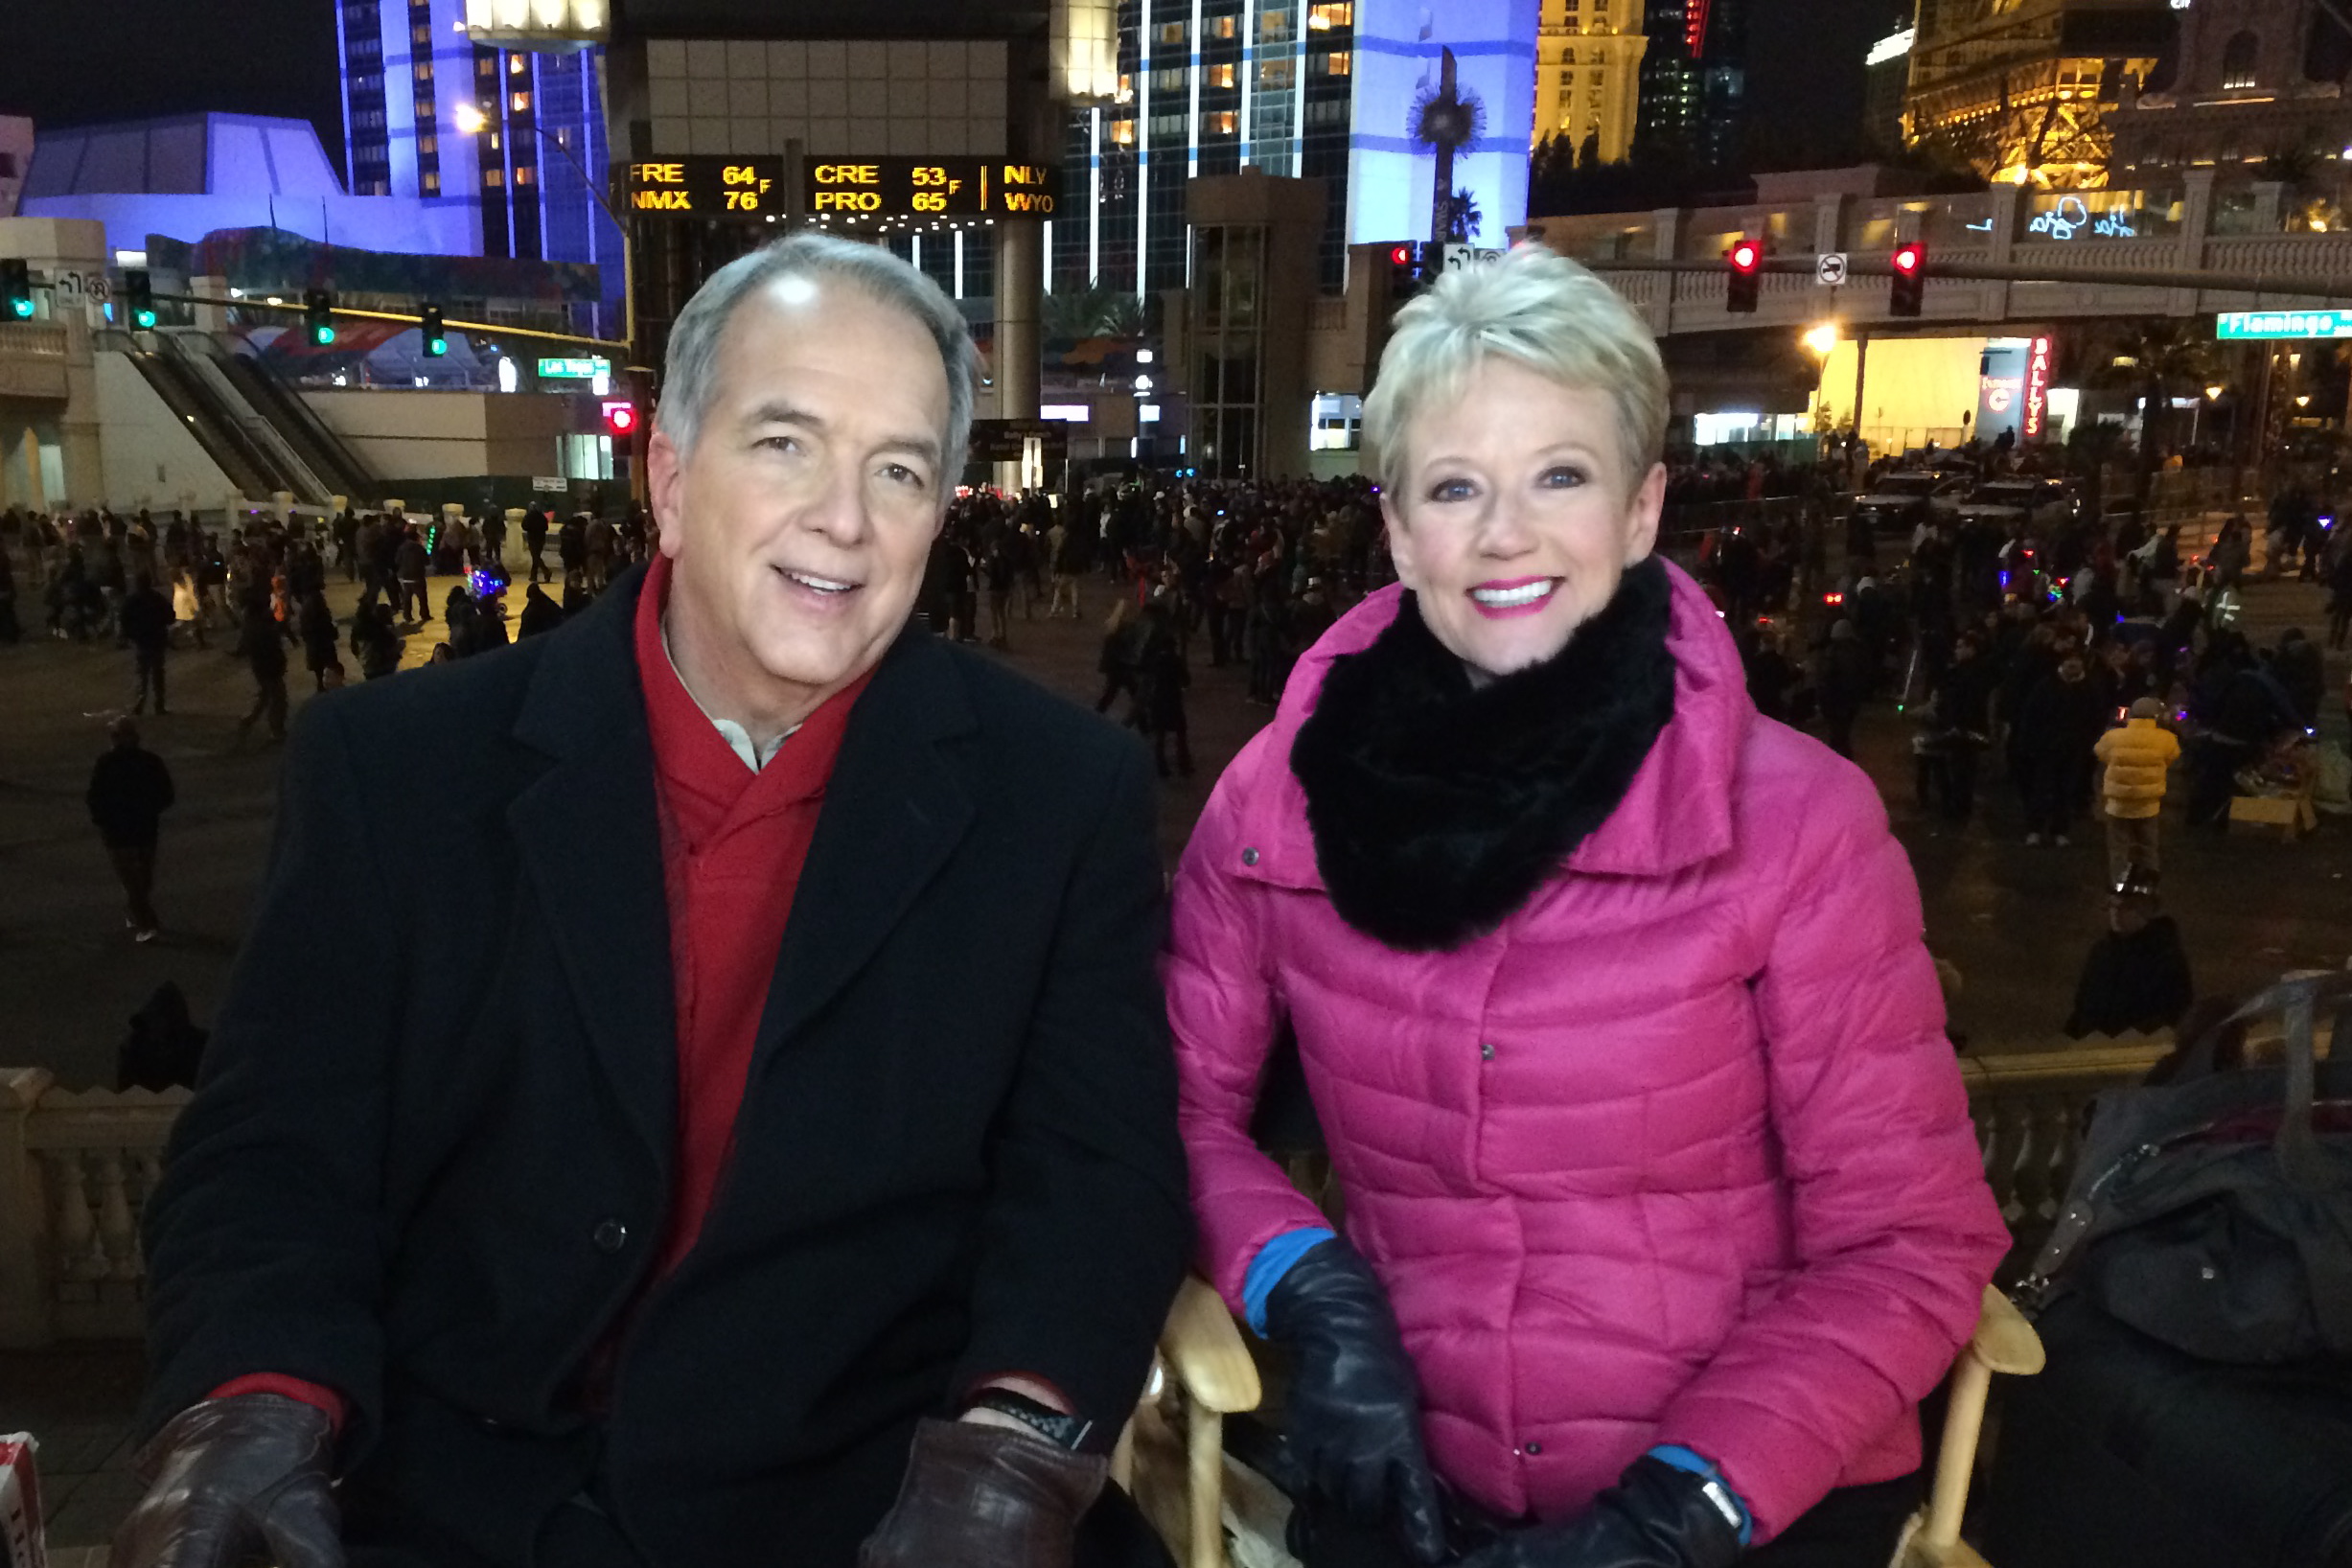 Preparing to broadcast live from the Las Vegas Strip Dec 31, 2014